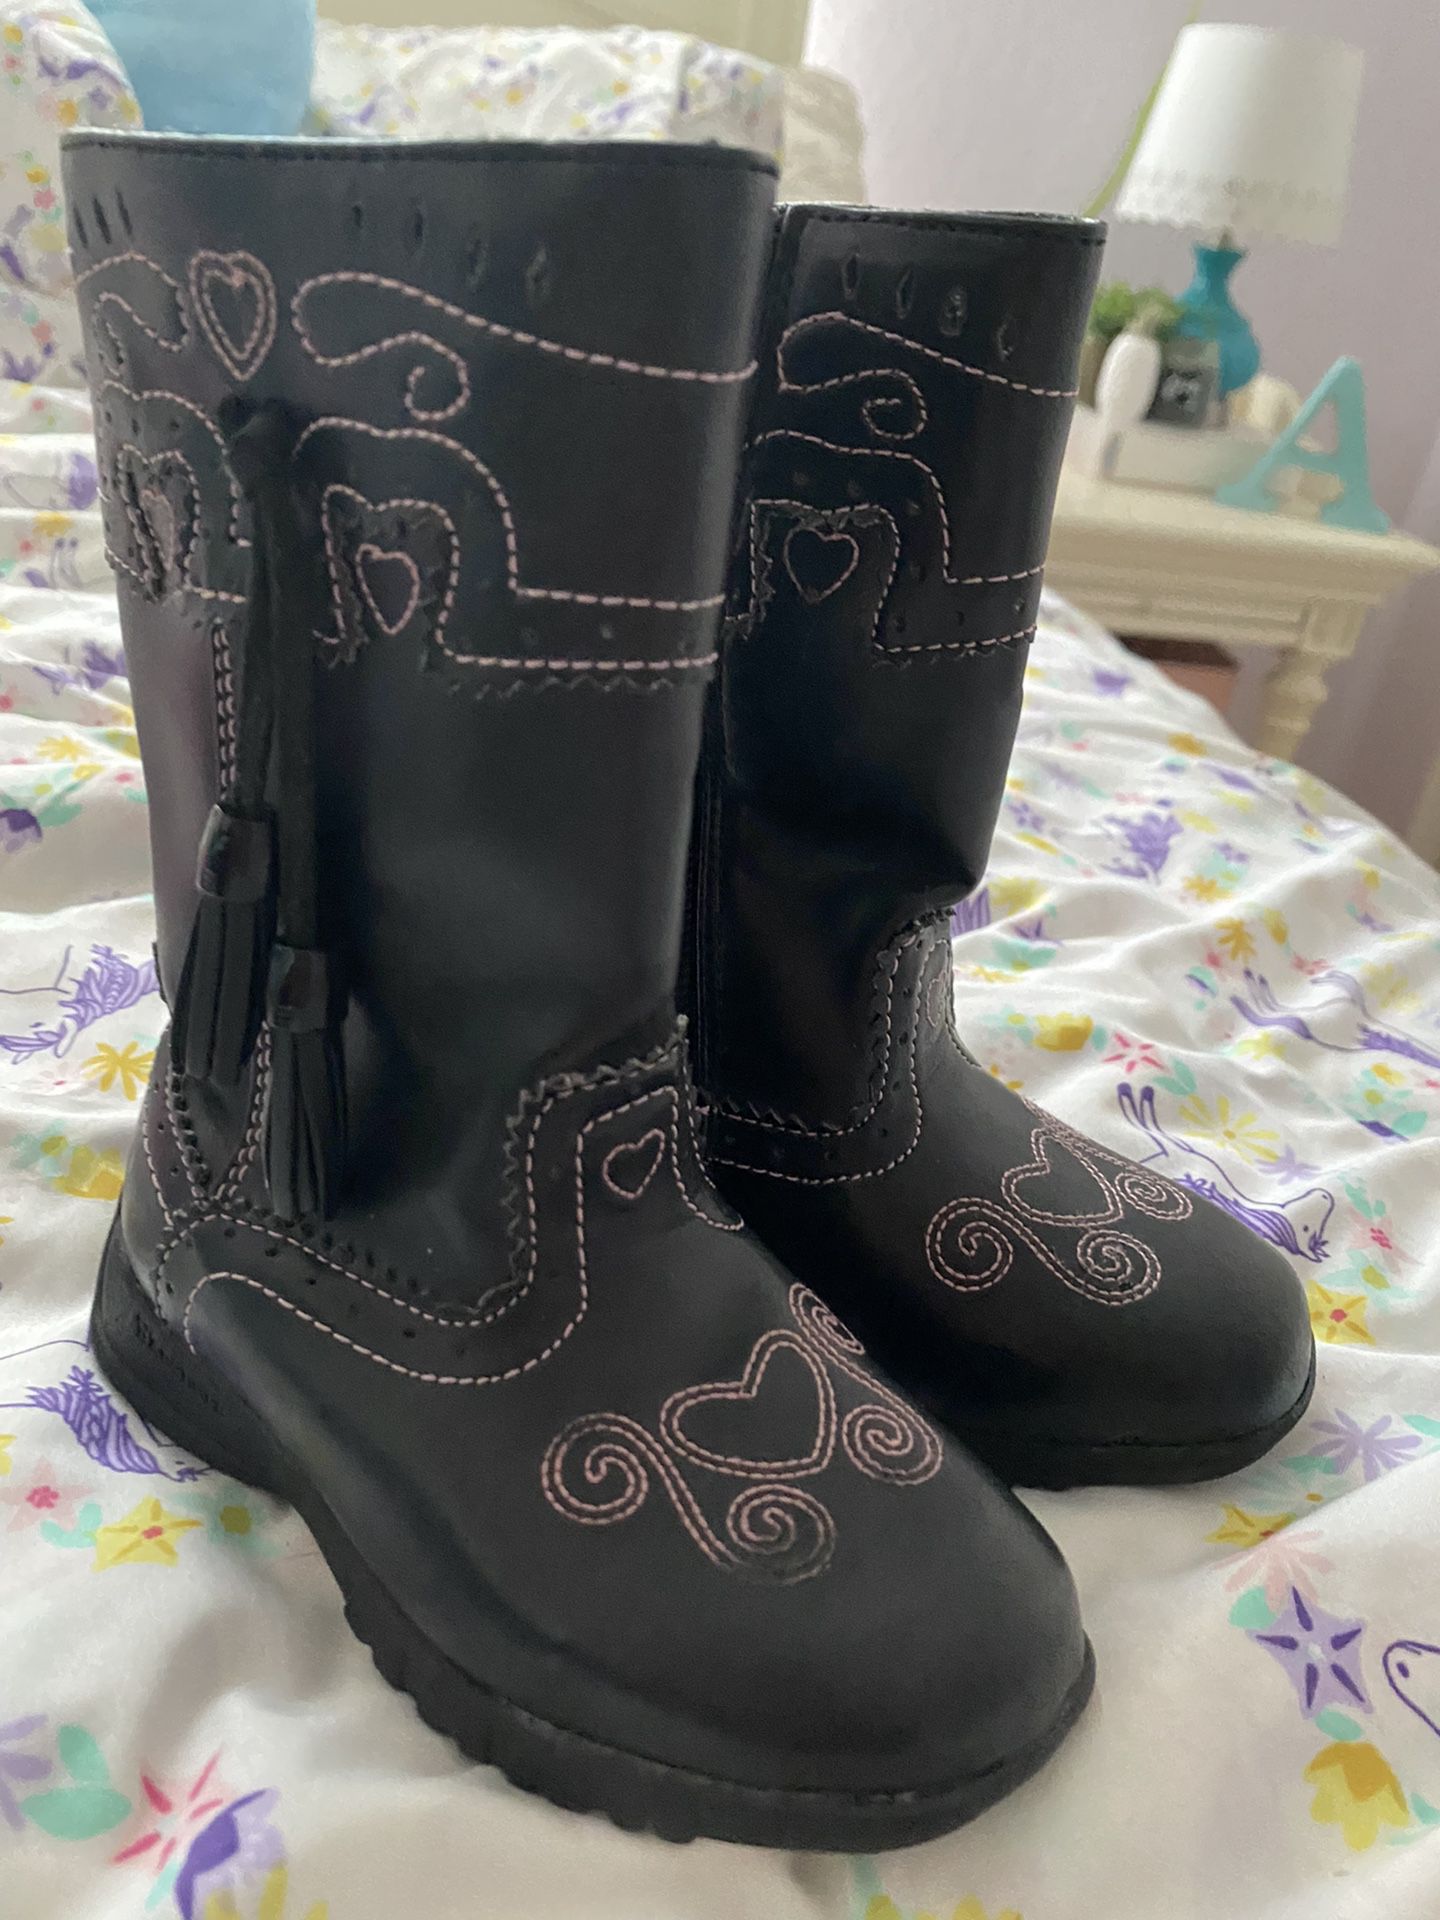 Little Girl’s Boots - Size 6